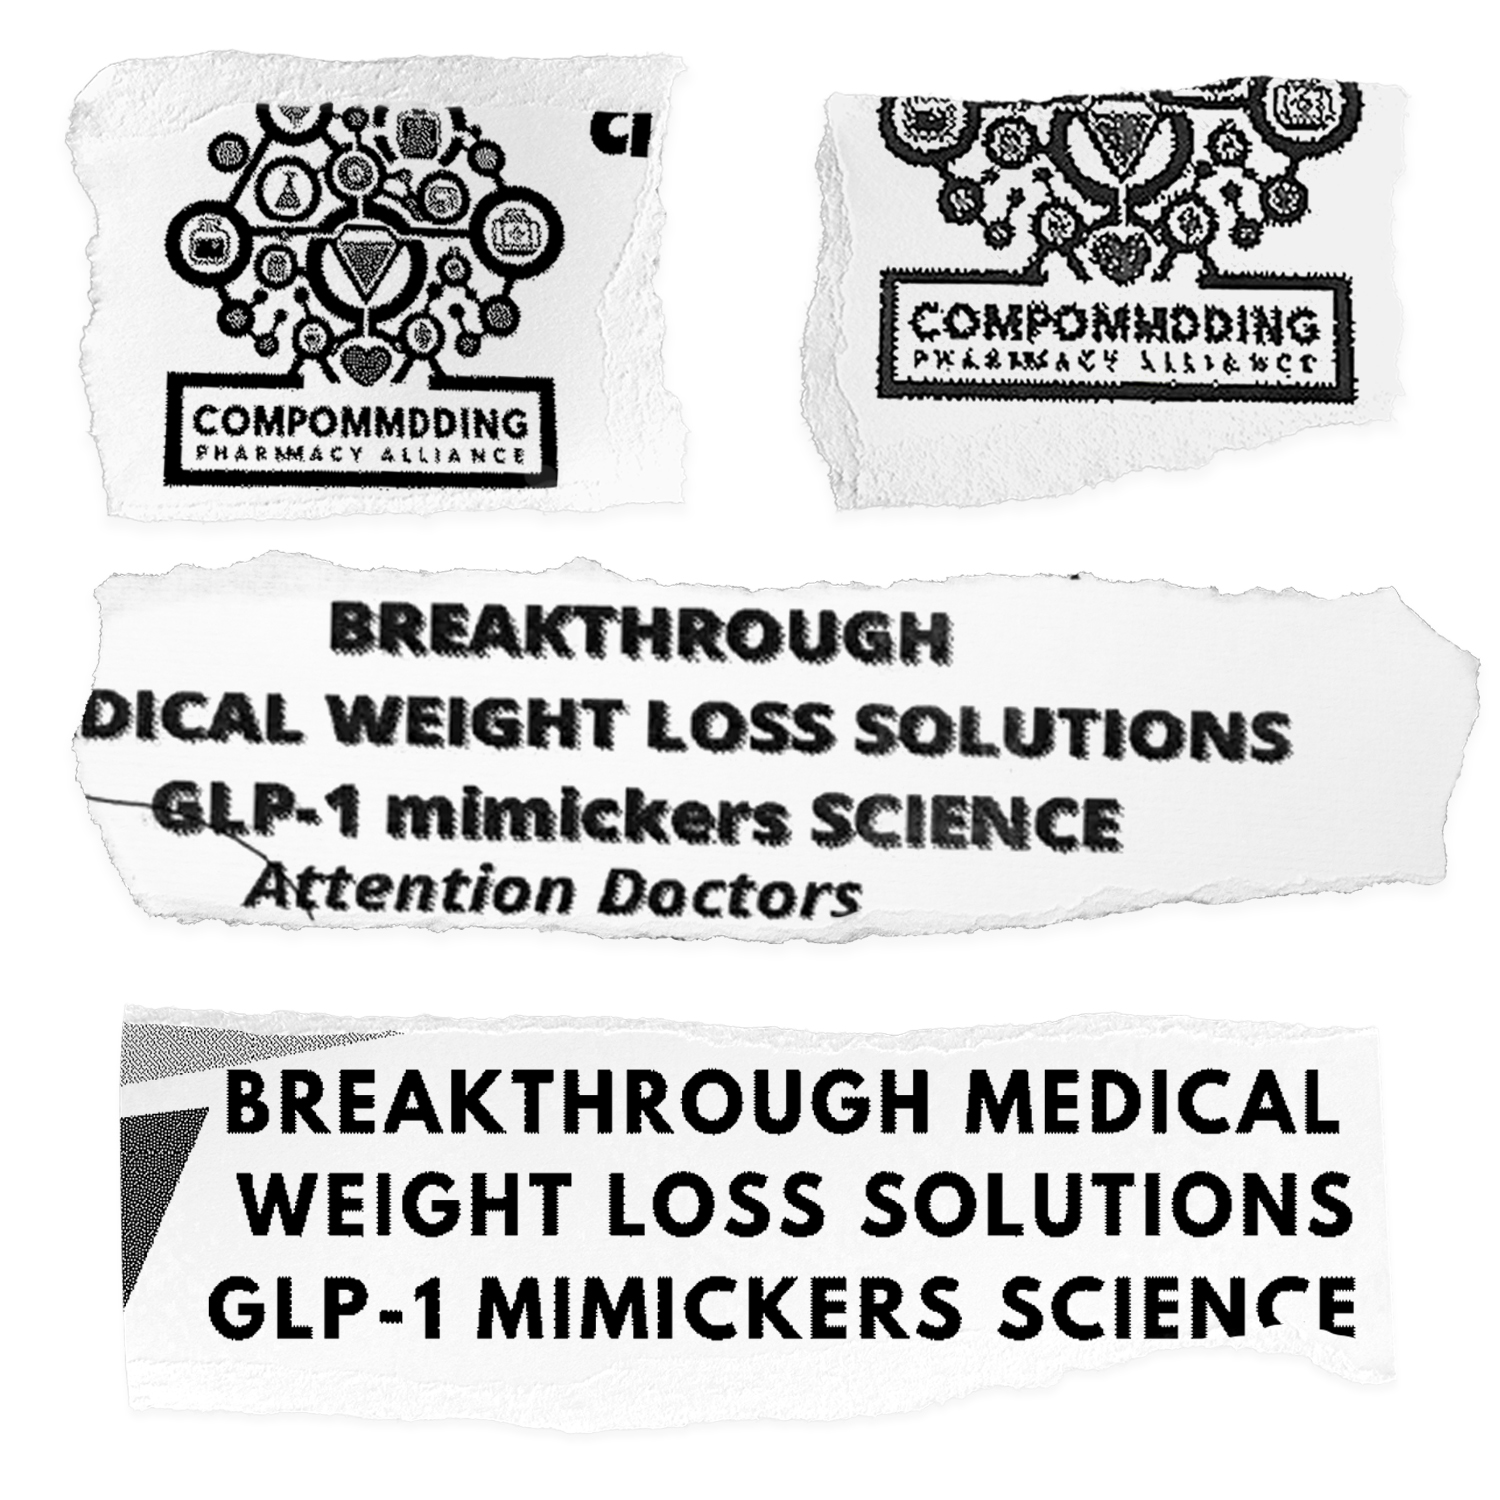 Four torn pieces of paper. Two have the same phrase "GLP-1 Mimickers science" the others have the same logo.